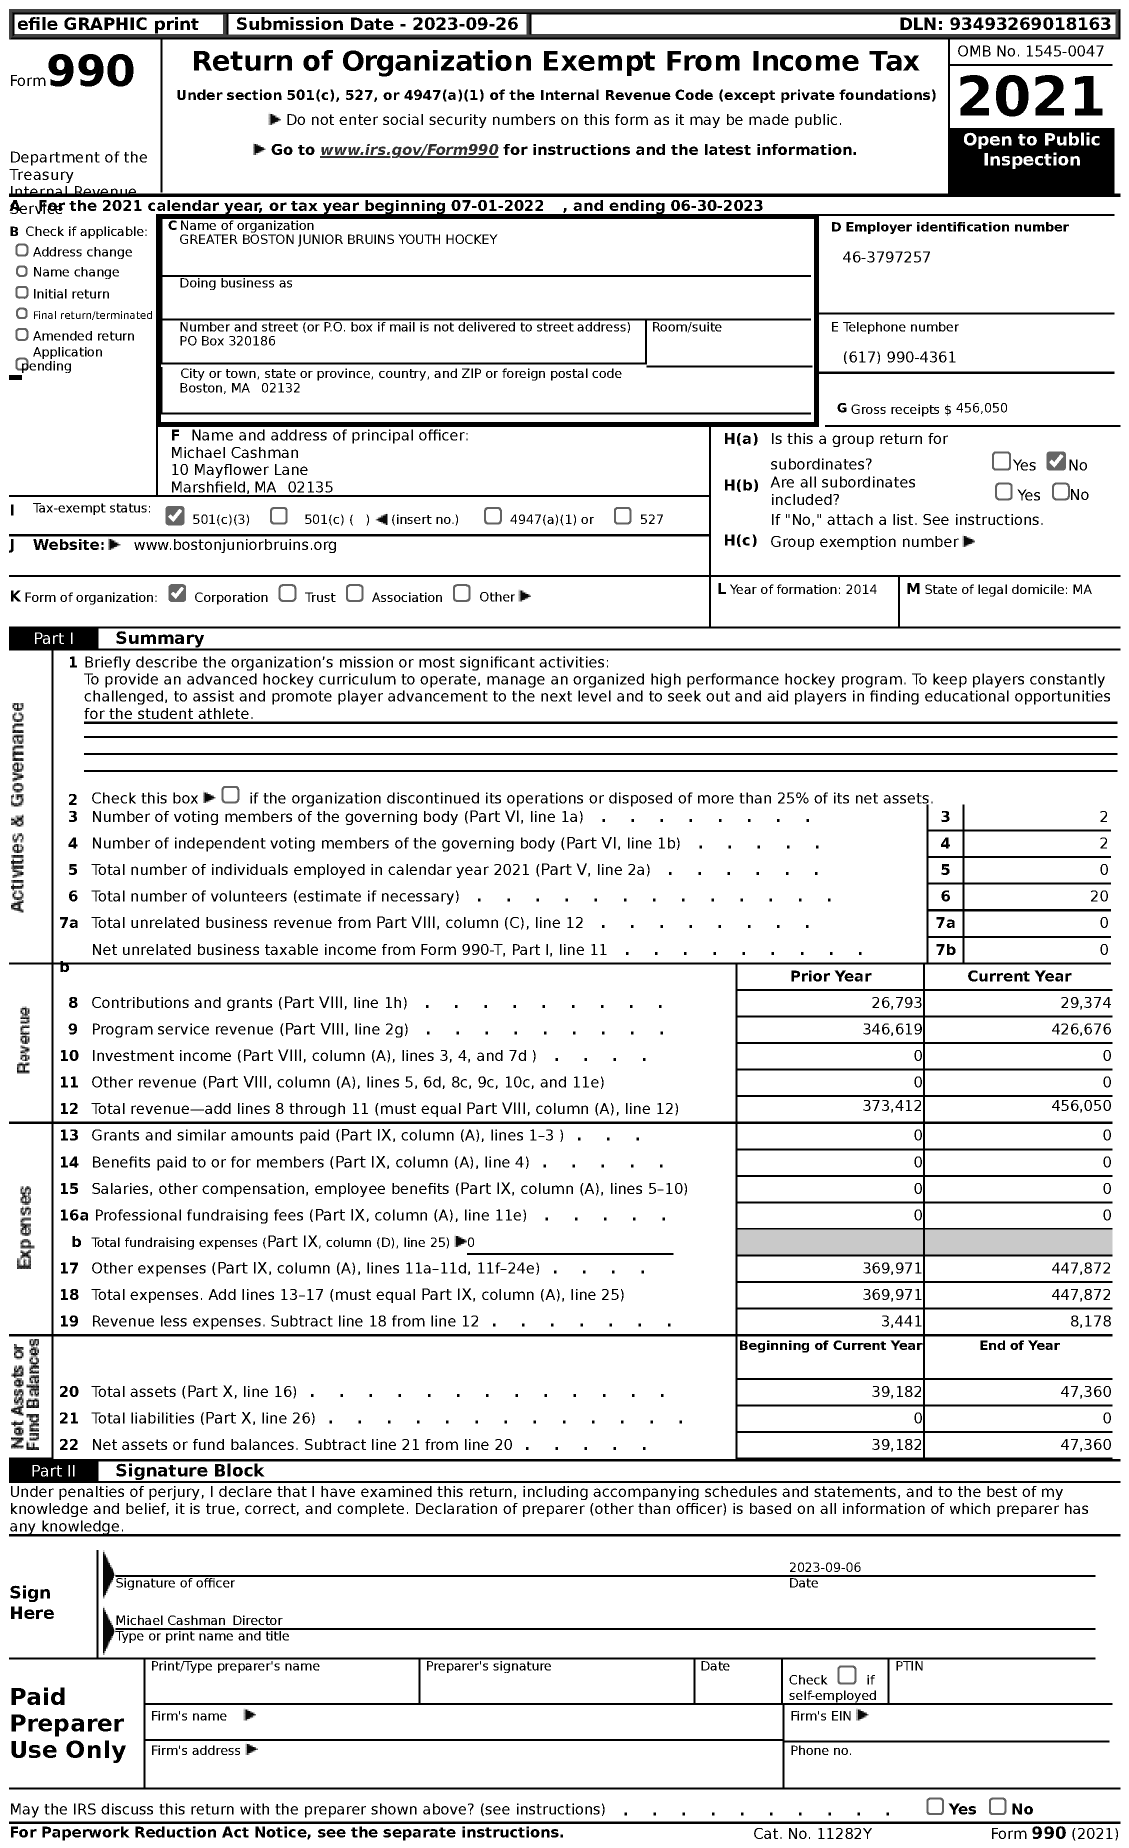 Image of first page of 2022 Form 990 for Greater Boston Junior Bruins Youth Hockey